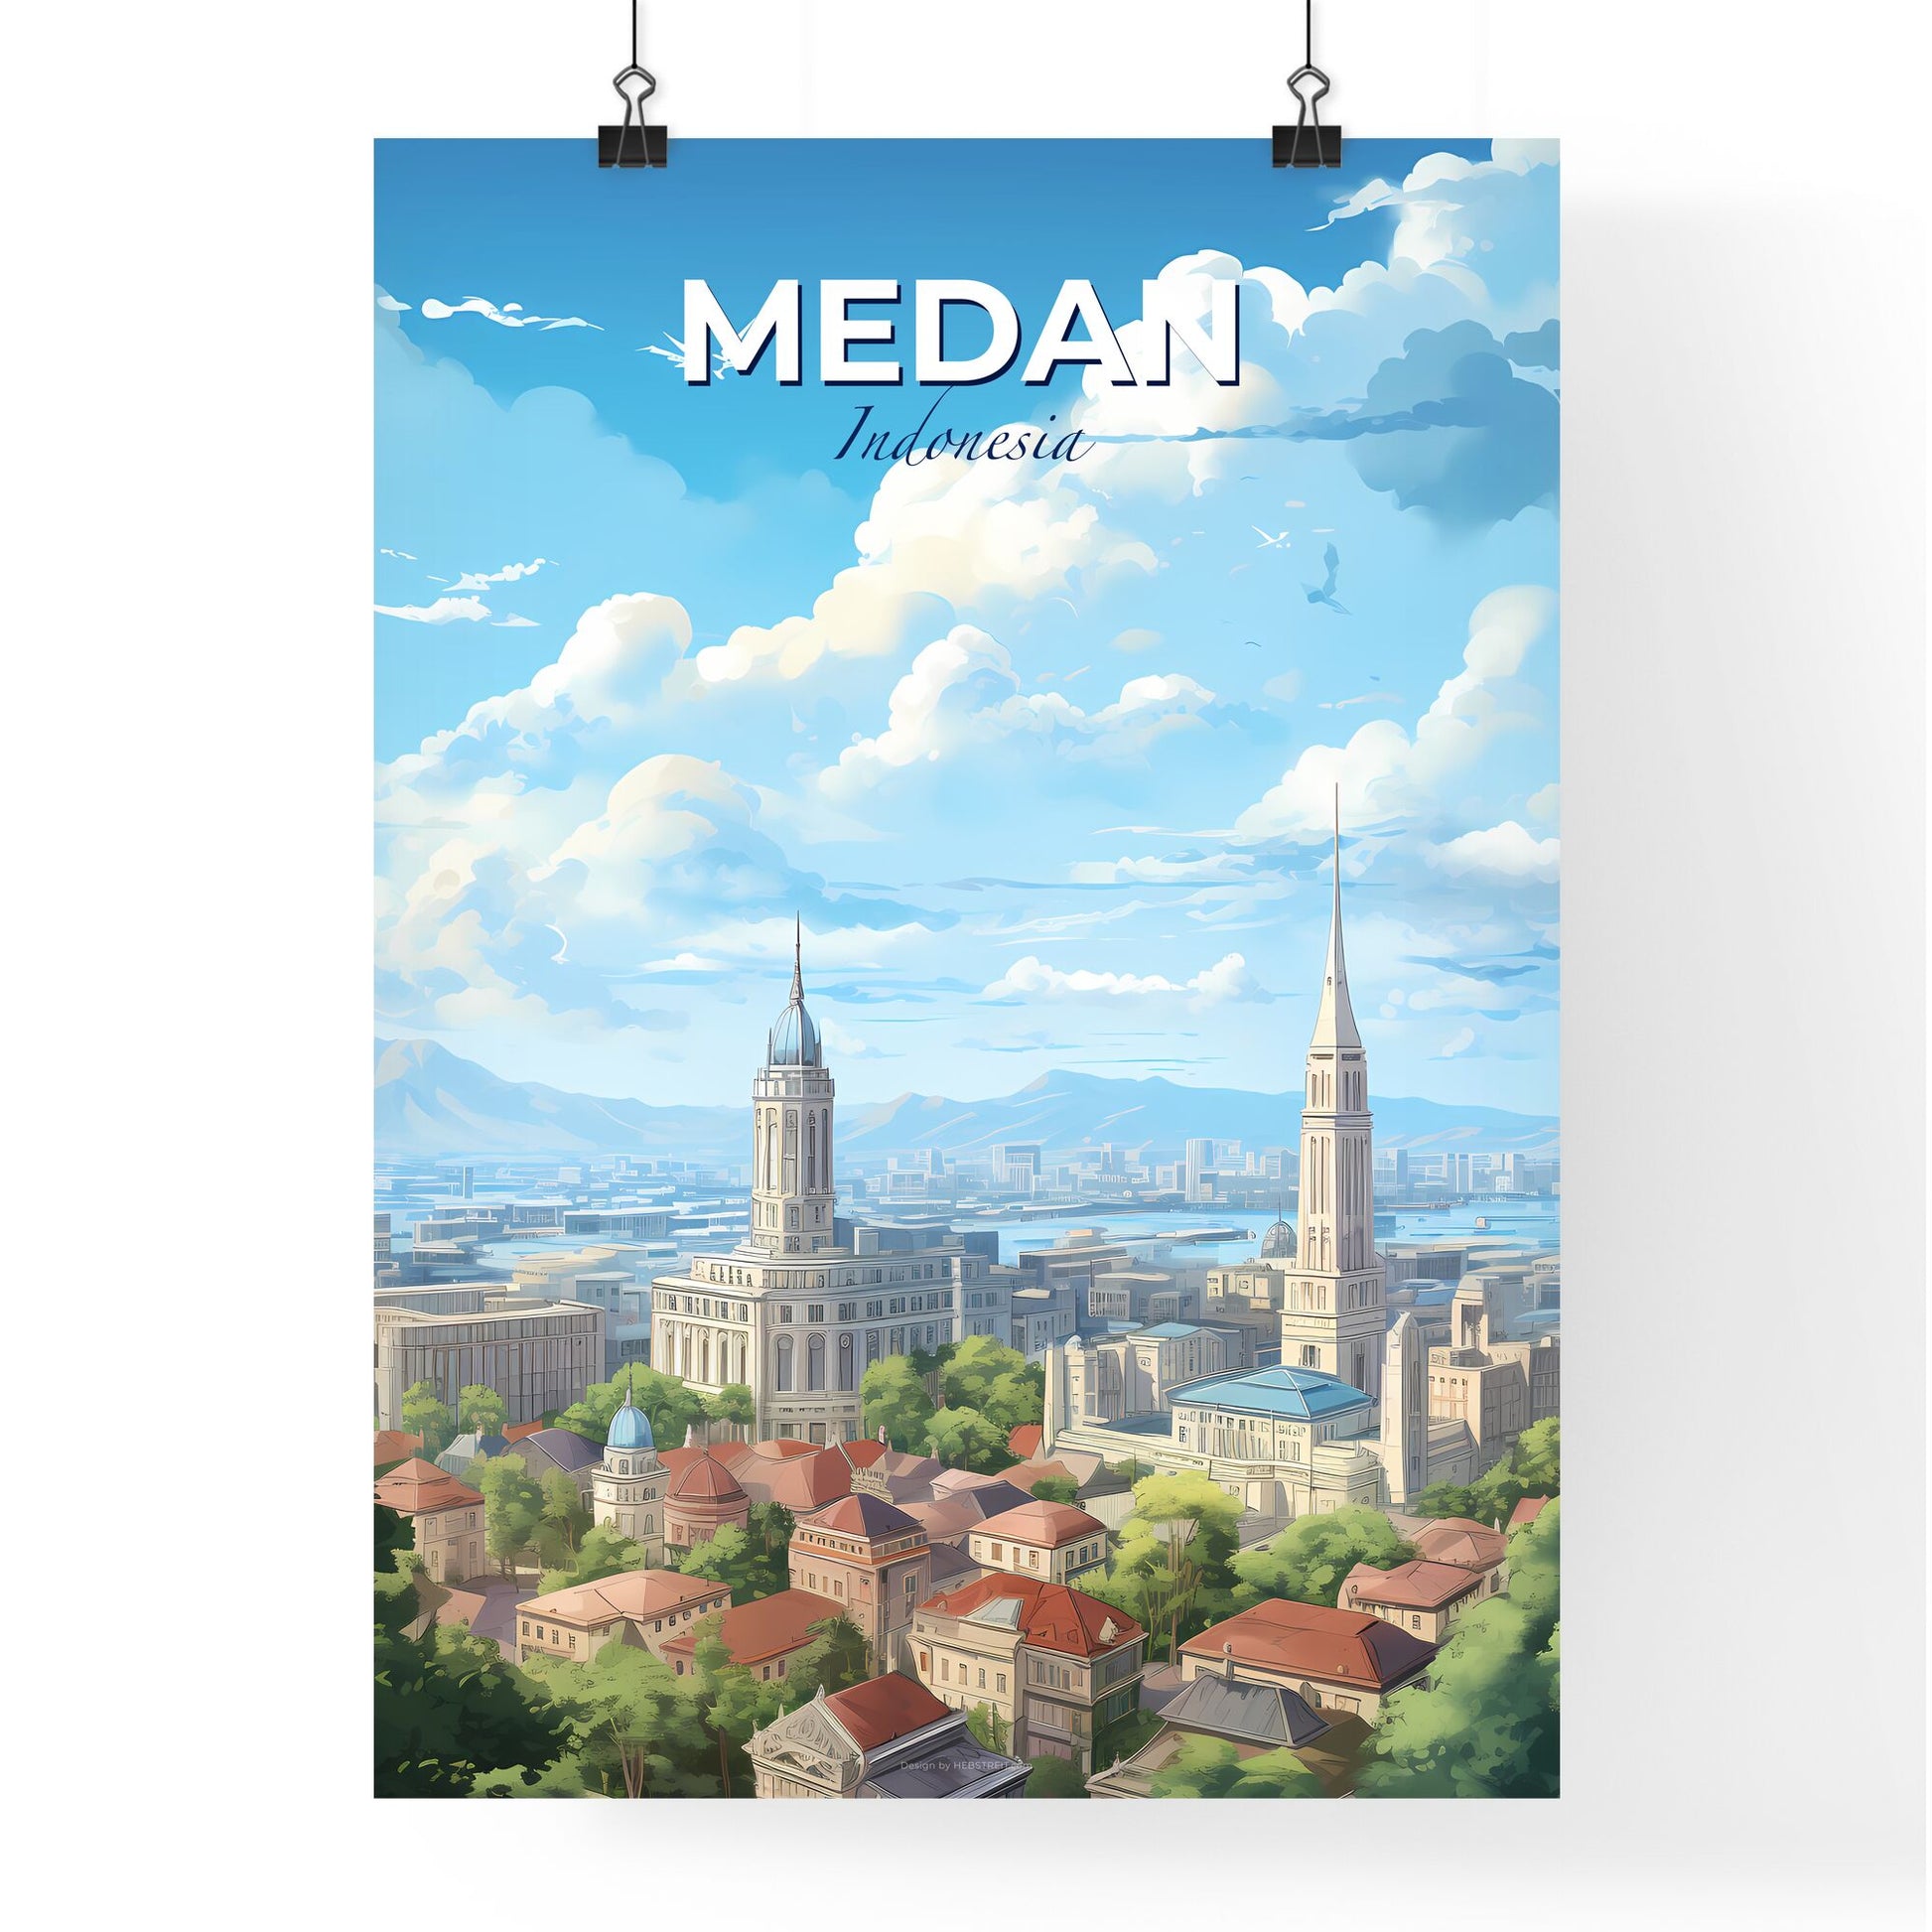 Medan Indonesia Skyline - A City With Many Towers And Trees - Customizable Travel Gift